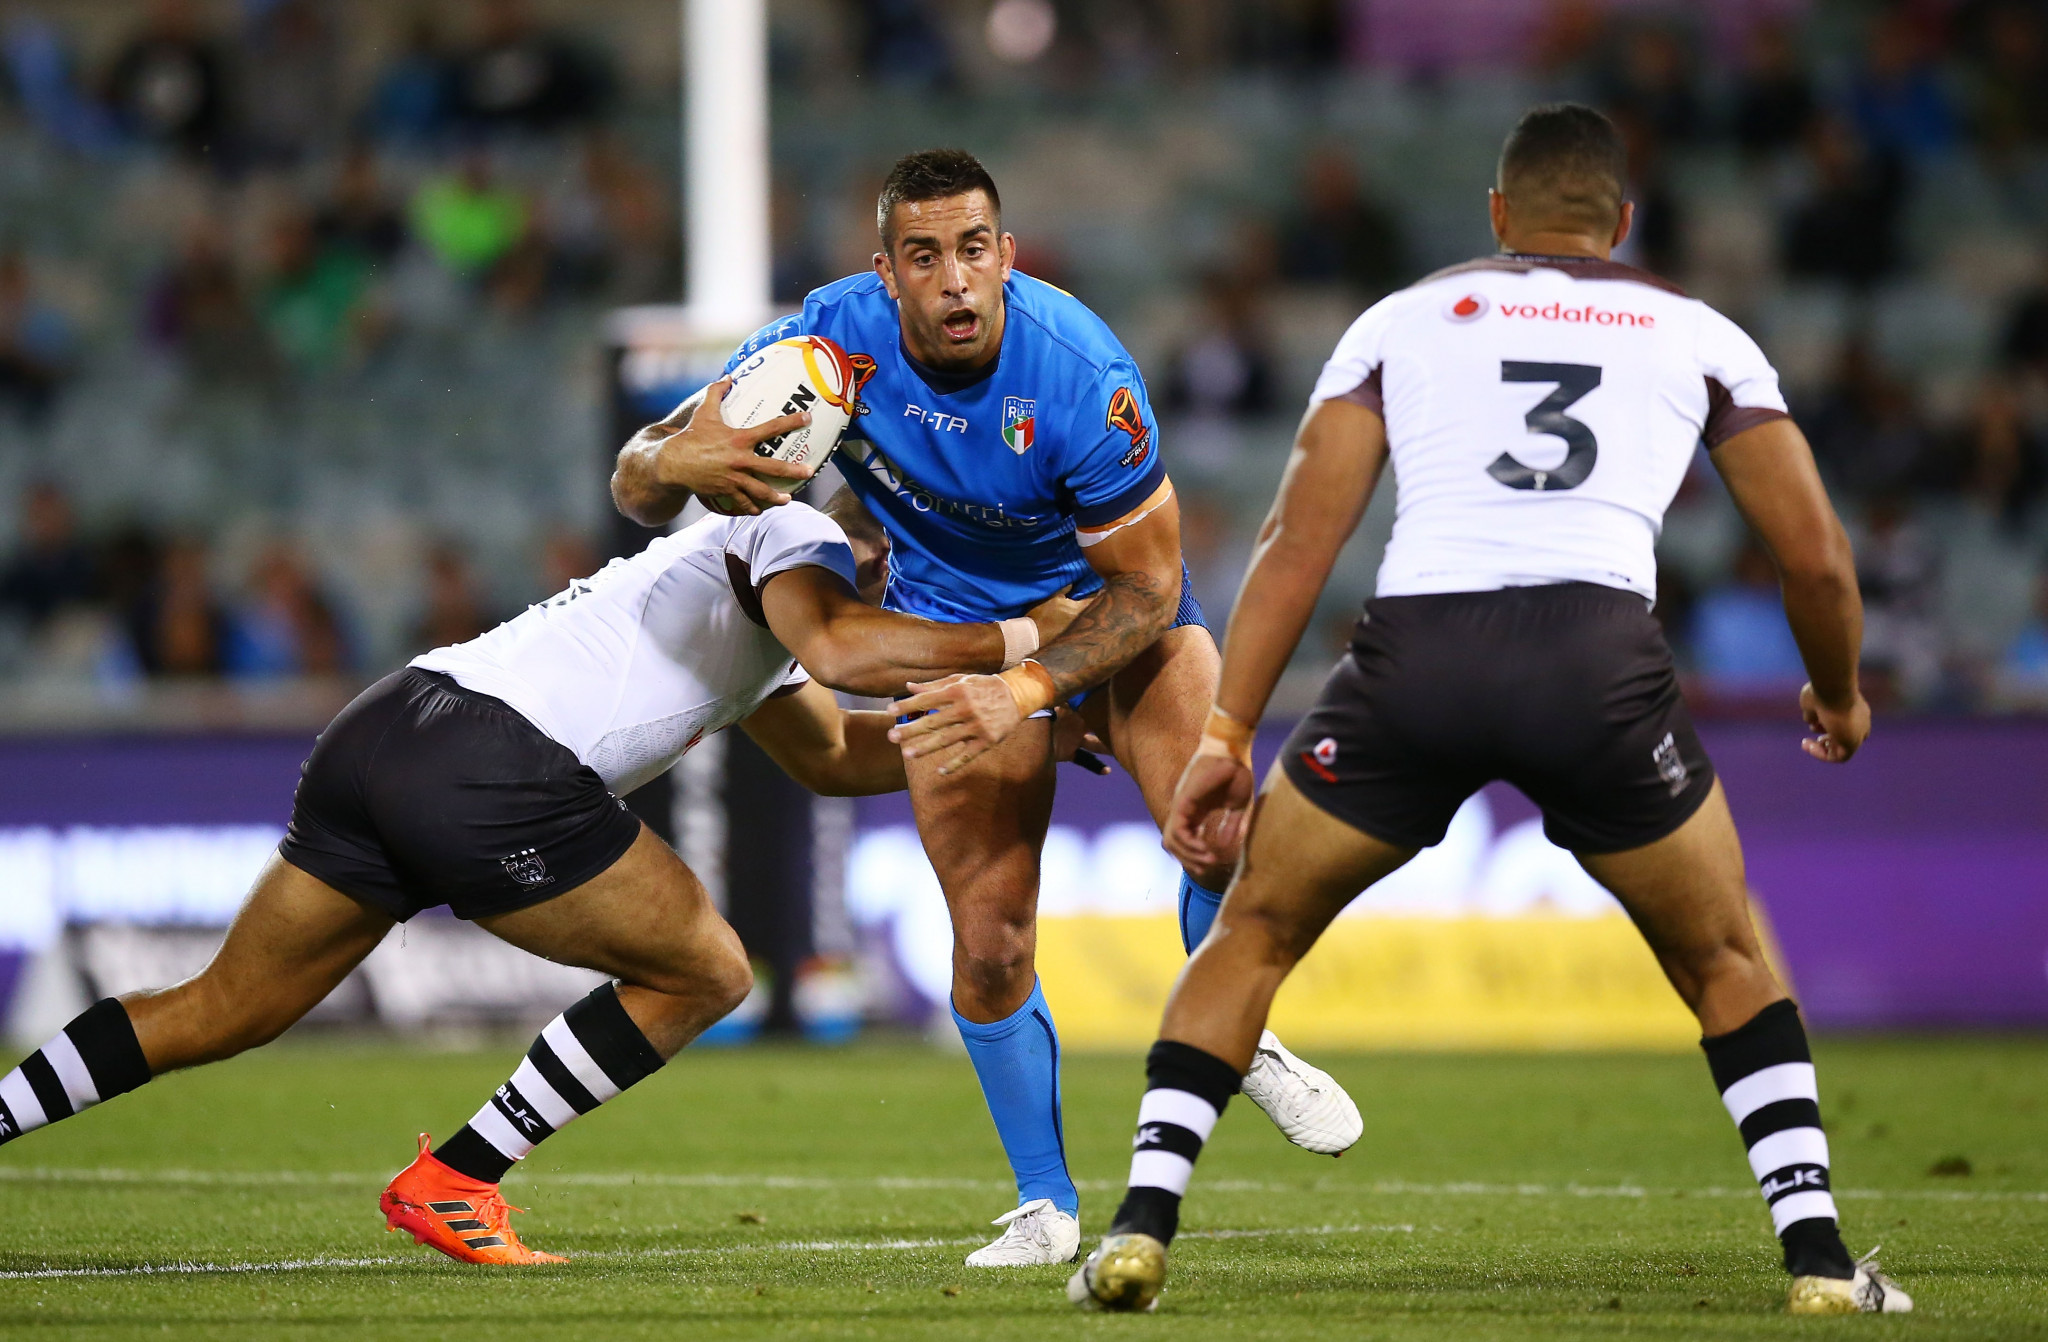 Fiji romped past Italy to reach the quarter-final of the World Cup ©Getty Images